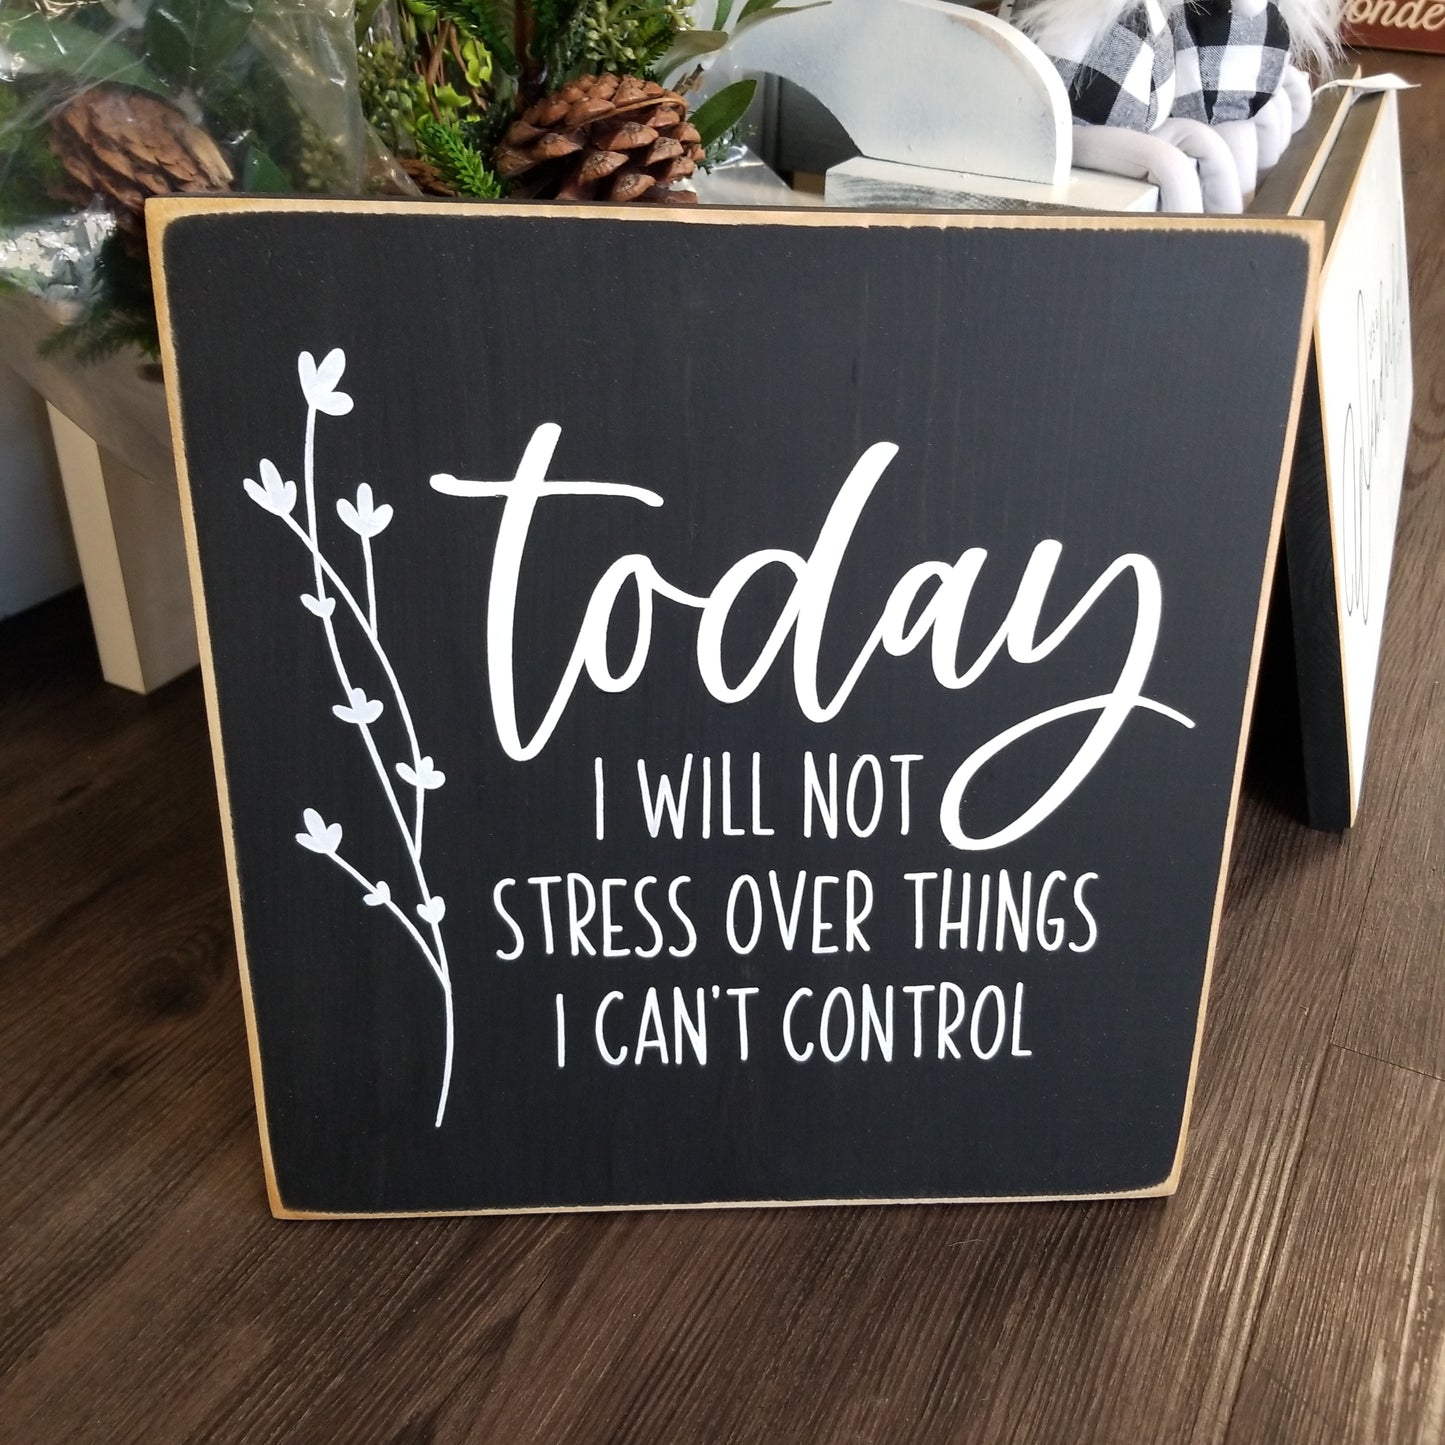 Today i will not stress over things i can't control 